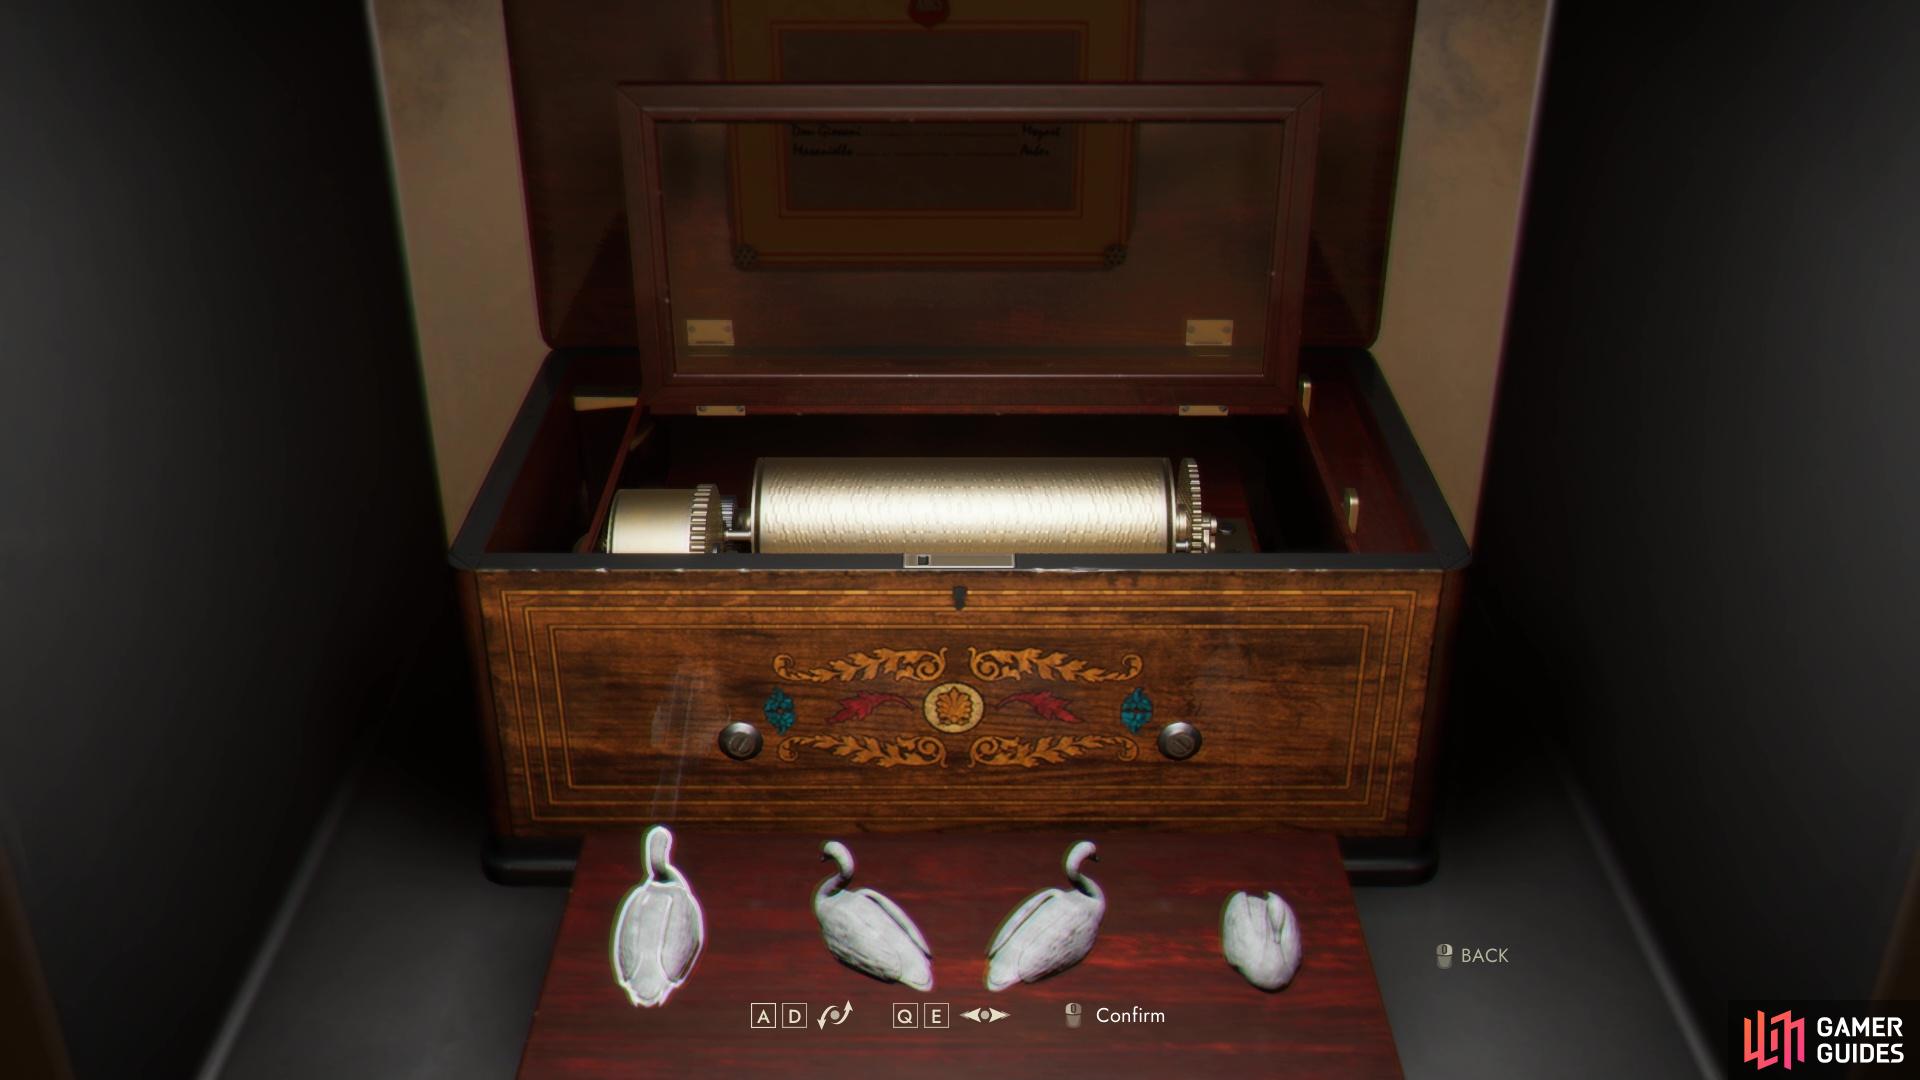 You’ll need to solve the Book puzzle before you can access the Music Box puzzle in Scene 07.